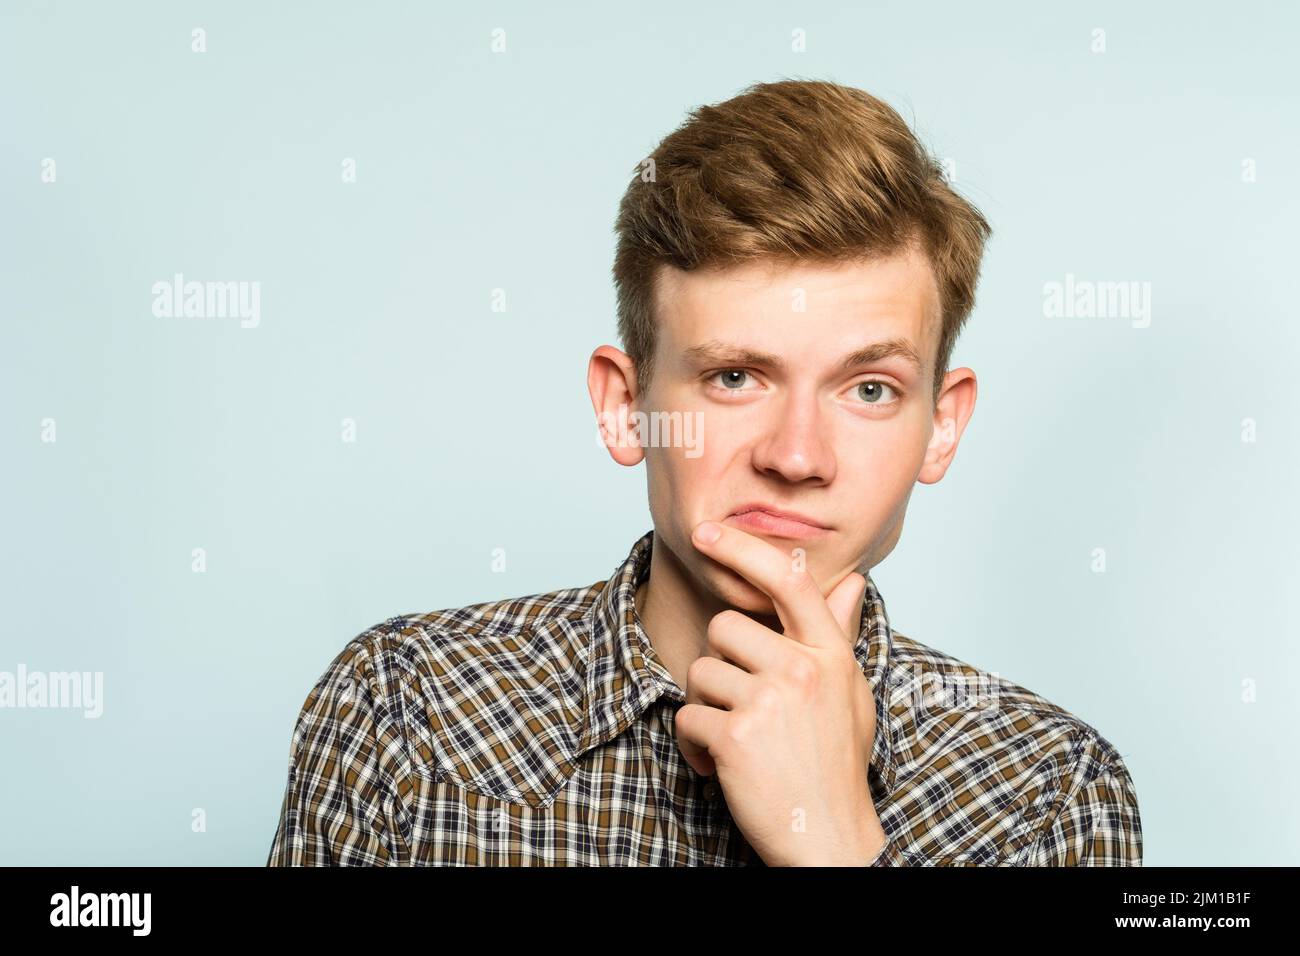 pondering contemplating man thinking scratch chin Stock Photo